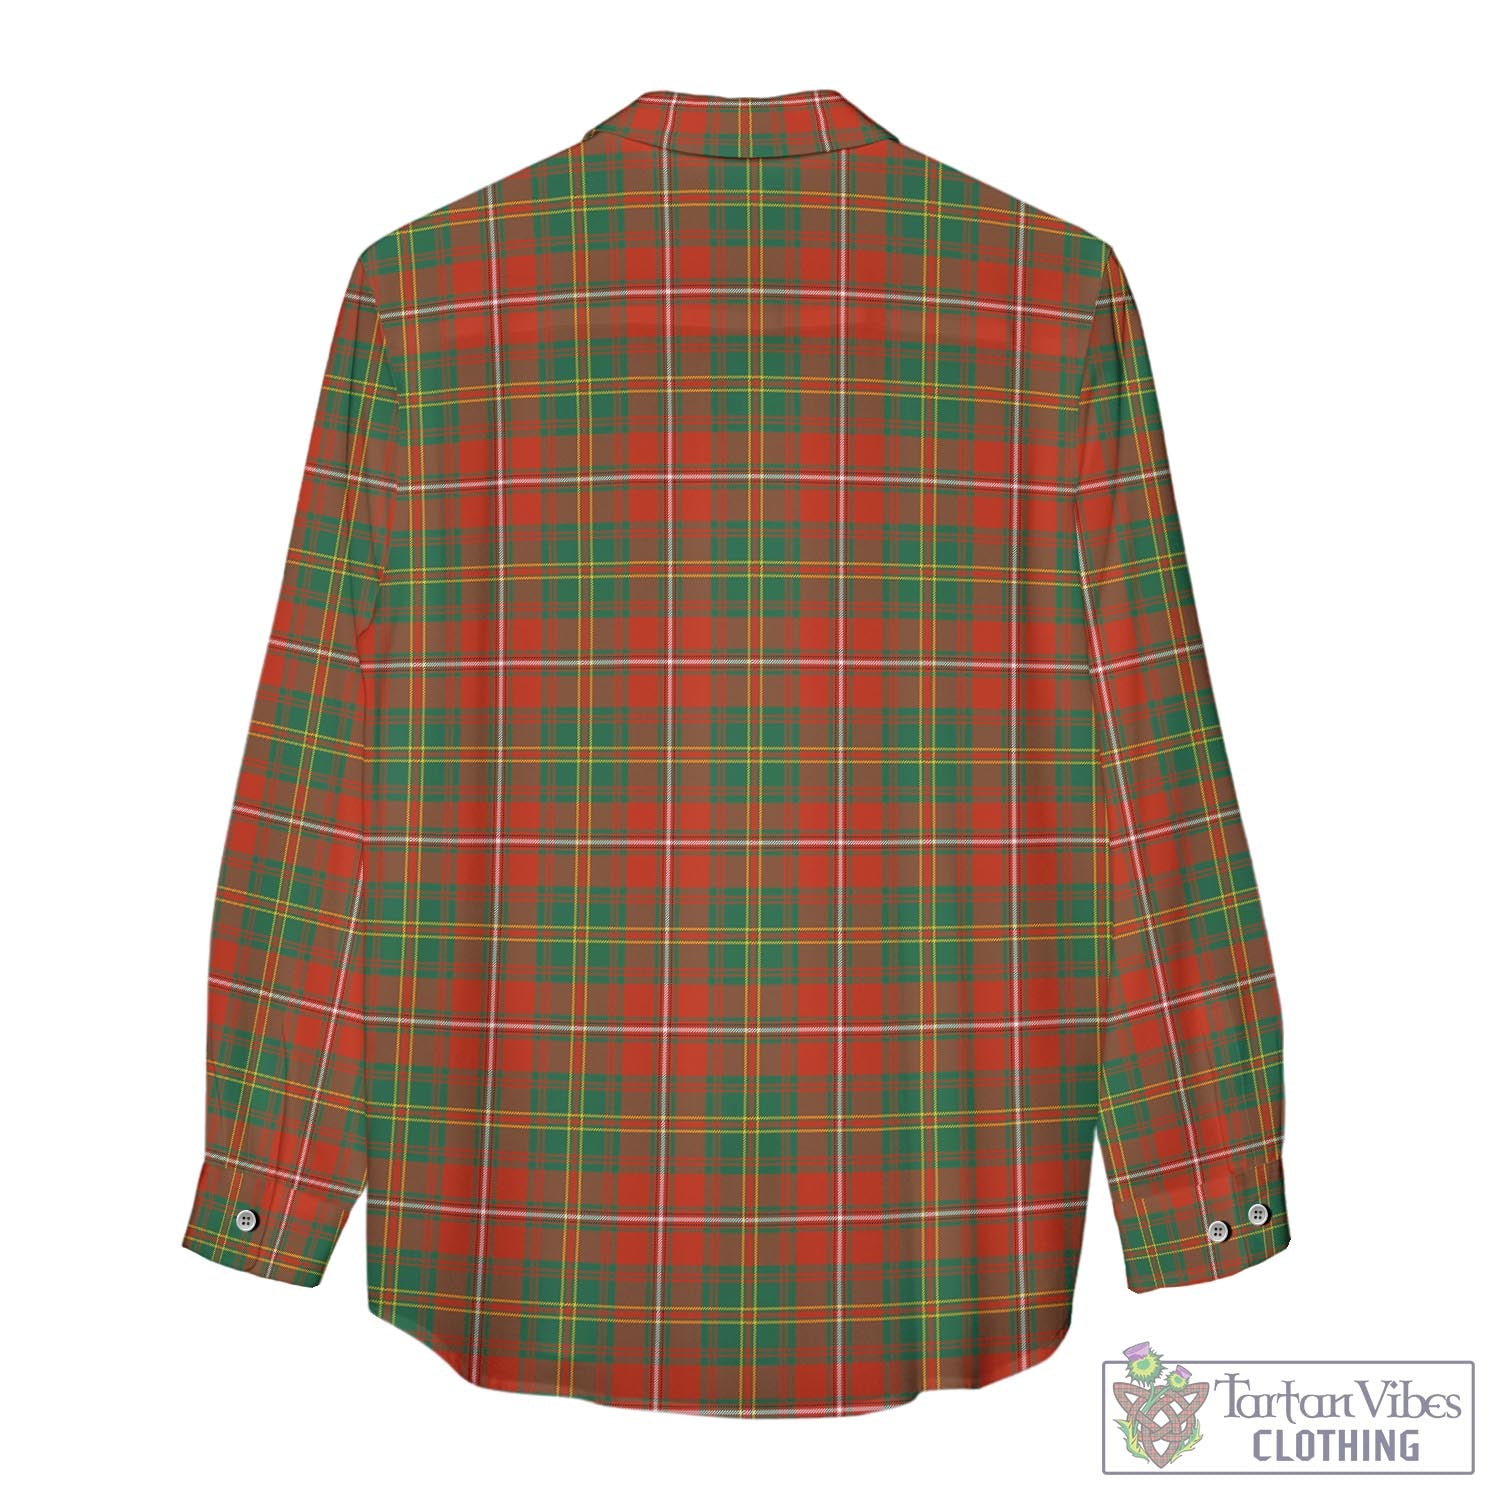 Tartan Vibes Clothing Hay Ancient Tartan Womens Casual Shirt with Family Crest